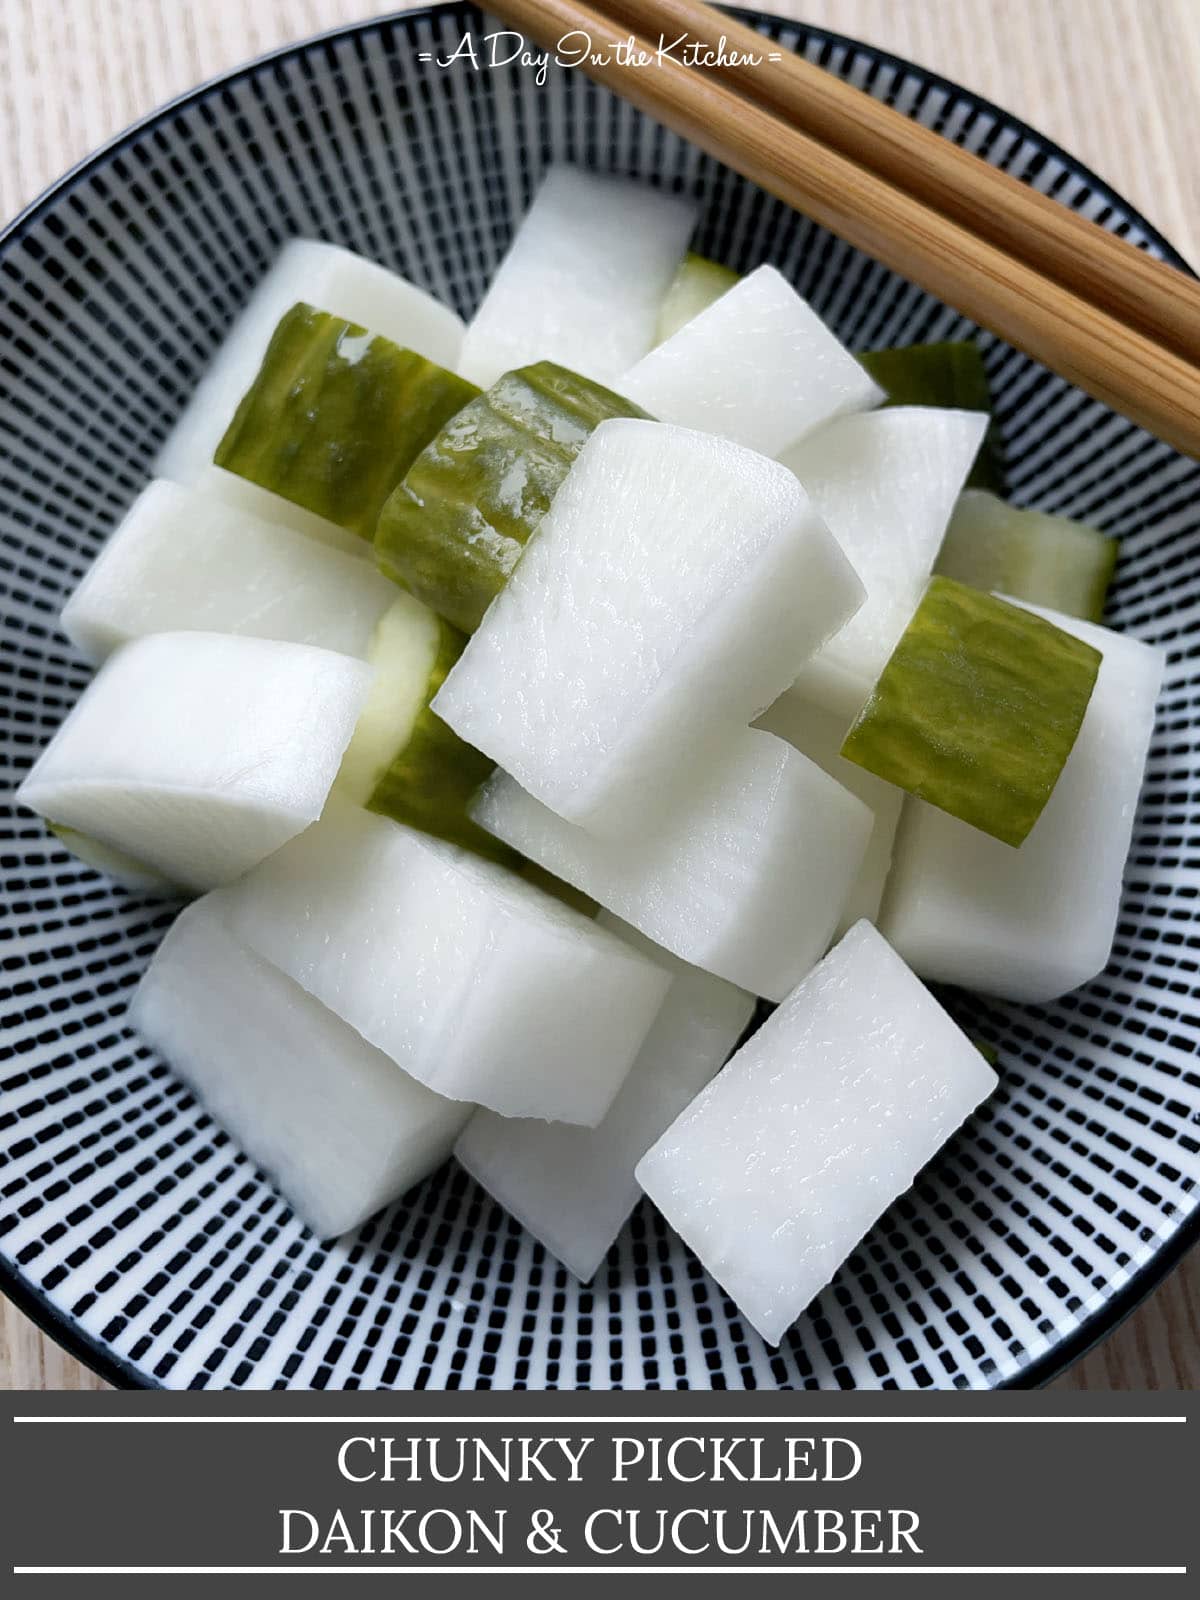 A pair of wooden chopsticks resting on a round bowl containing chunks of white radish and green cucumber, the words chunky pickled daikon and cucumber on the bottom.